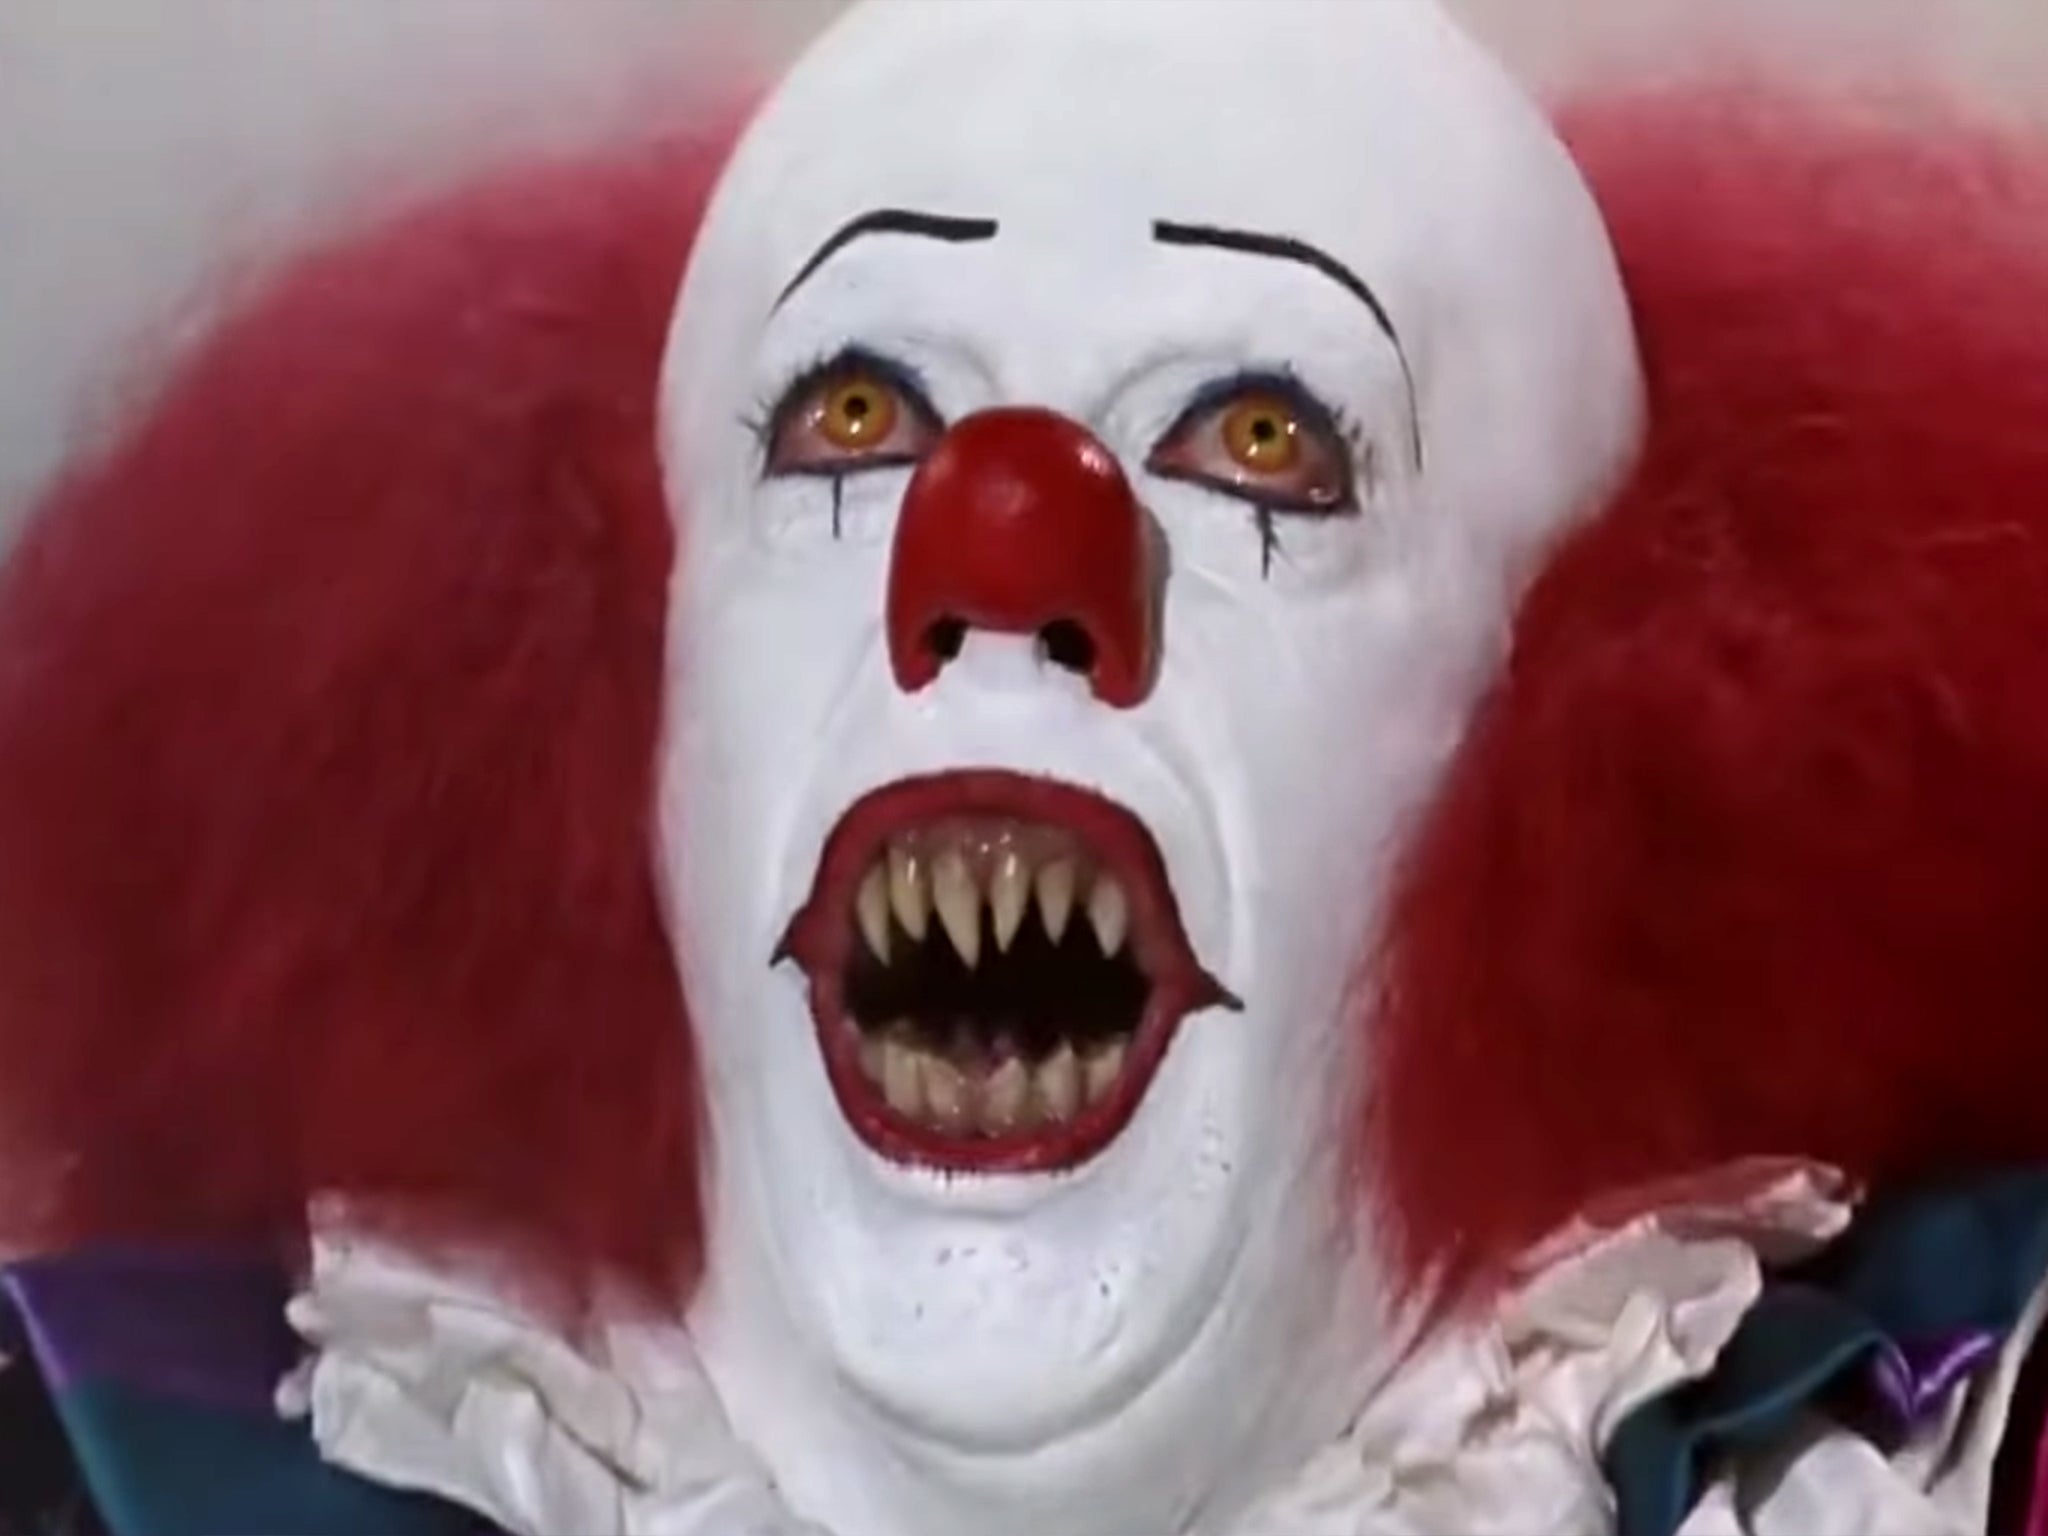 Tim Curry as Pennywise the clown in Stephen King’s ‘It’